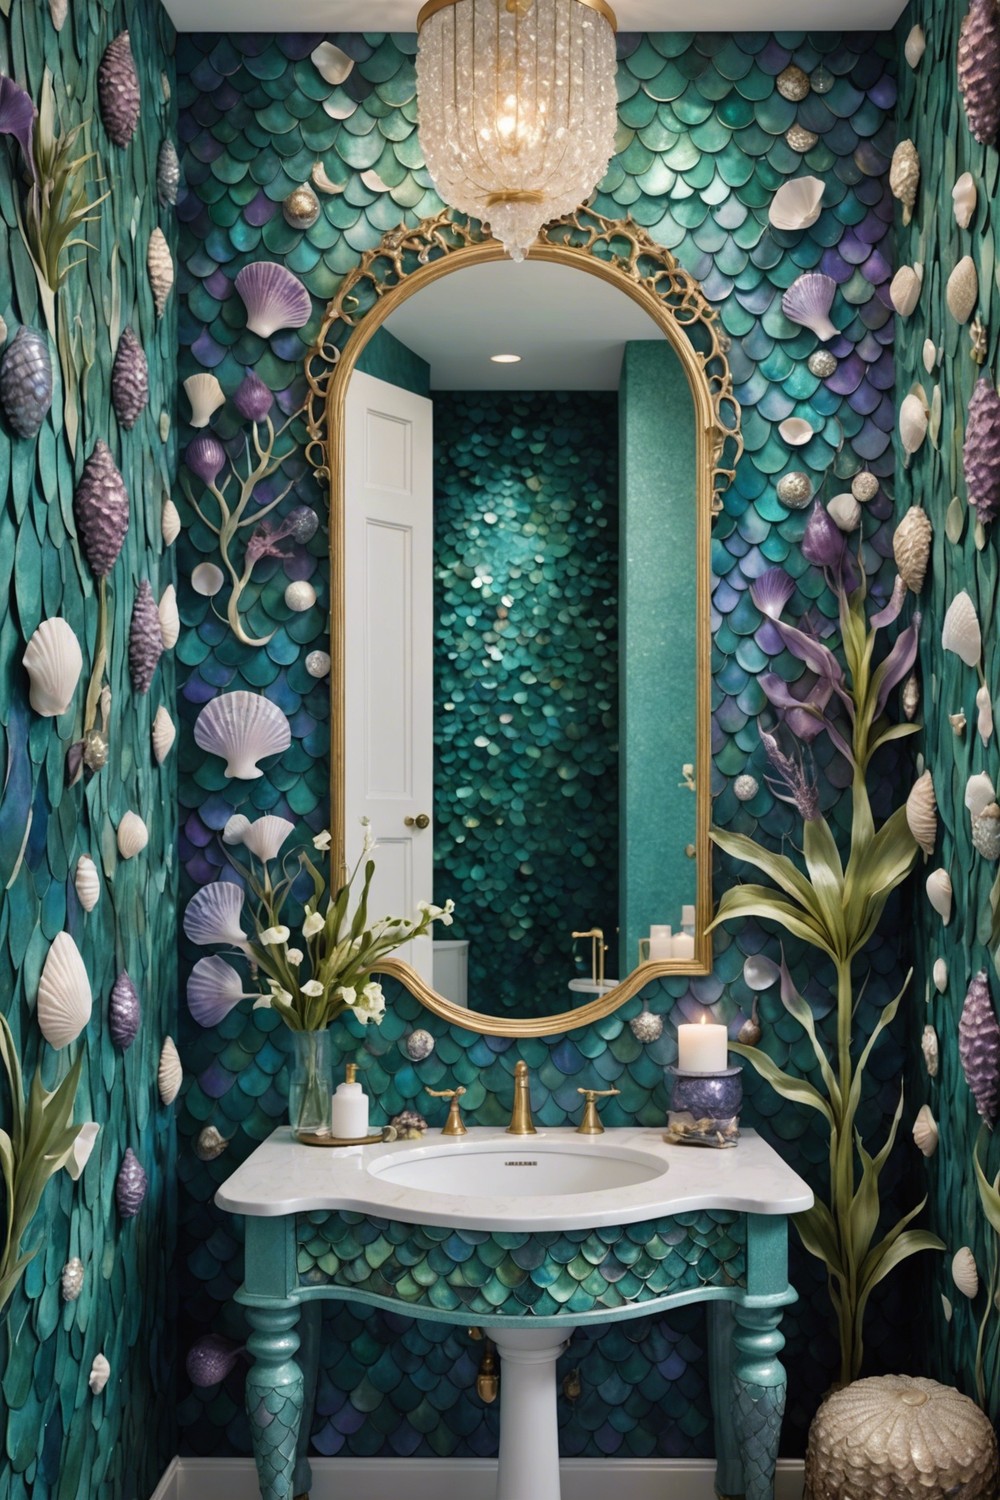 Mermaid's Grotto: Shimmering Scales and Ocean-Inspired Designs